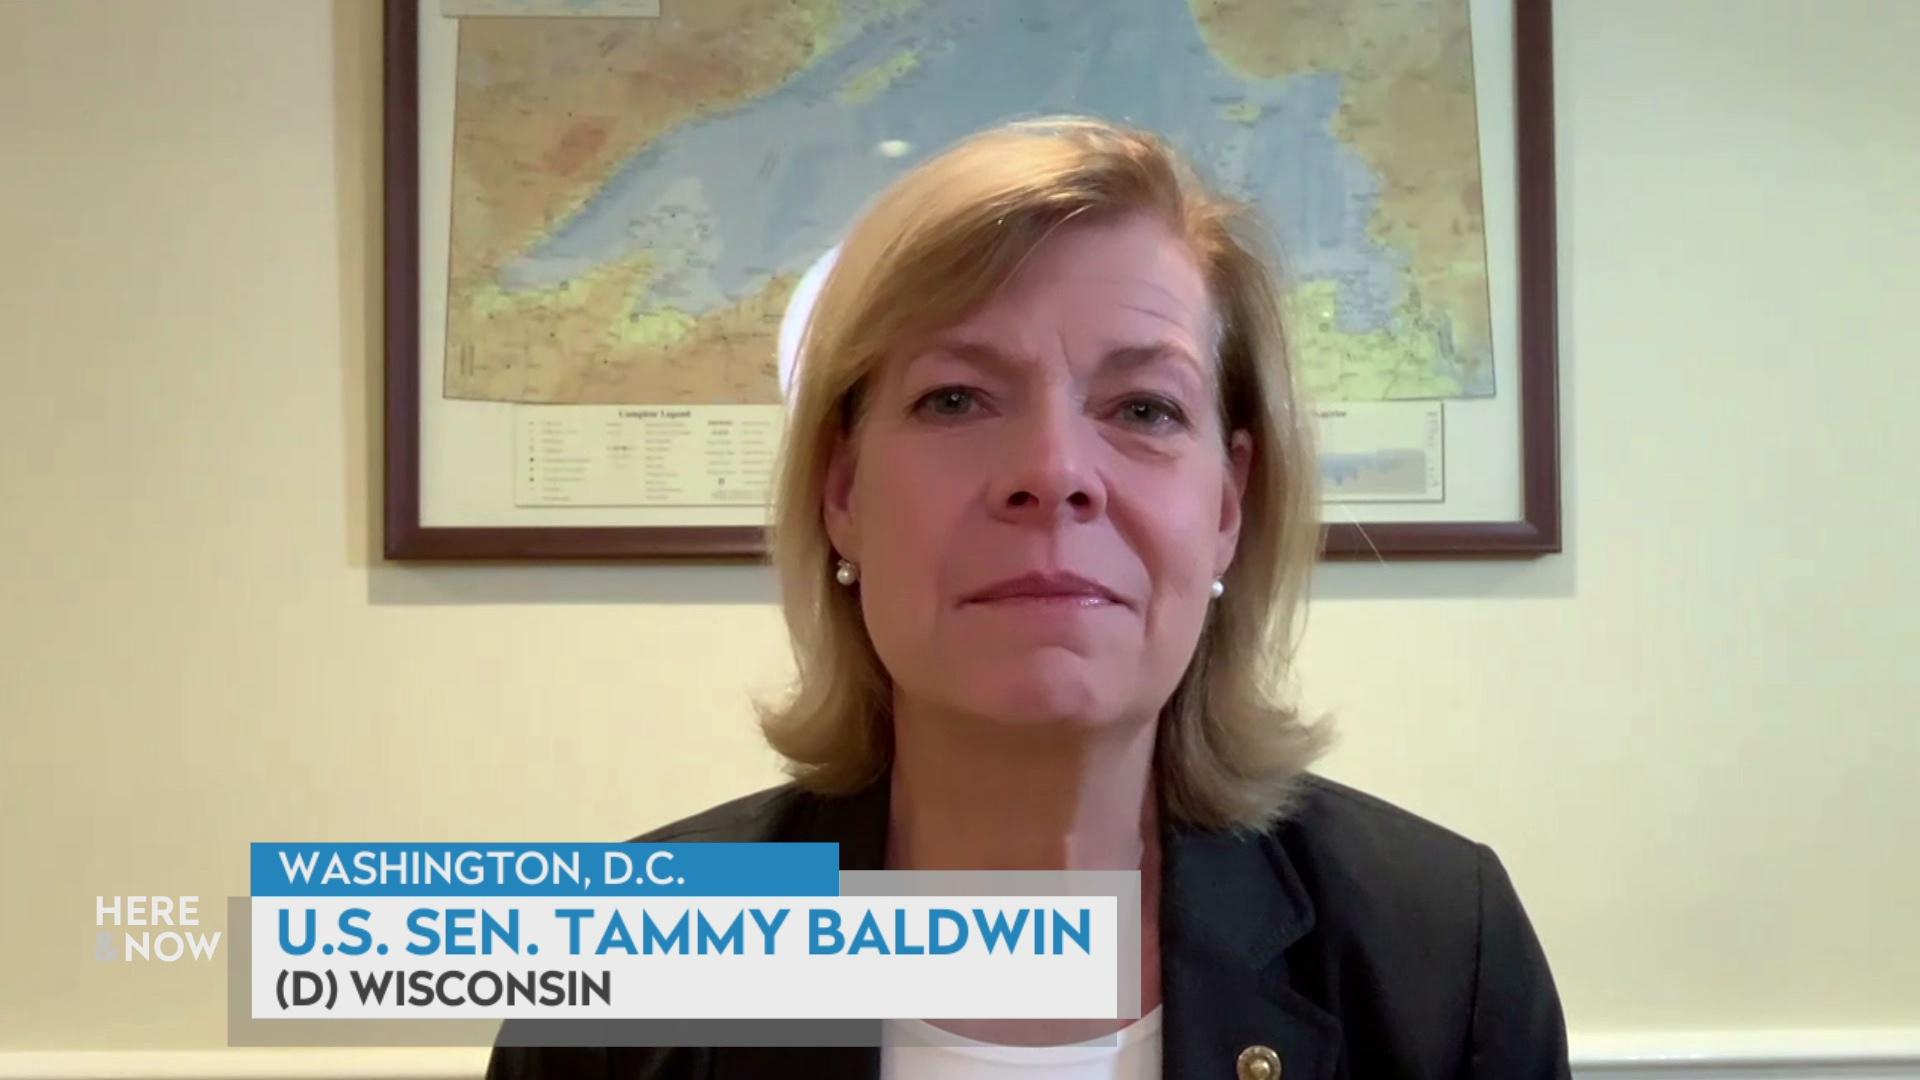 Sen. Tammy Baldwin on passing the Respect for Marriage Act